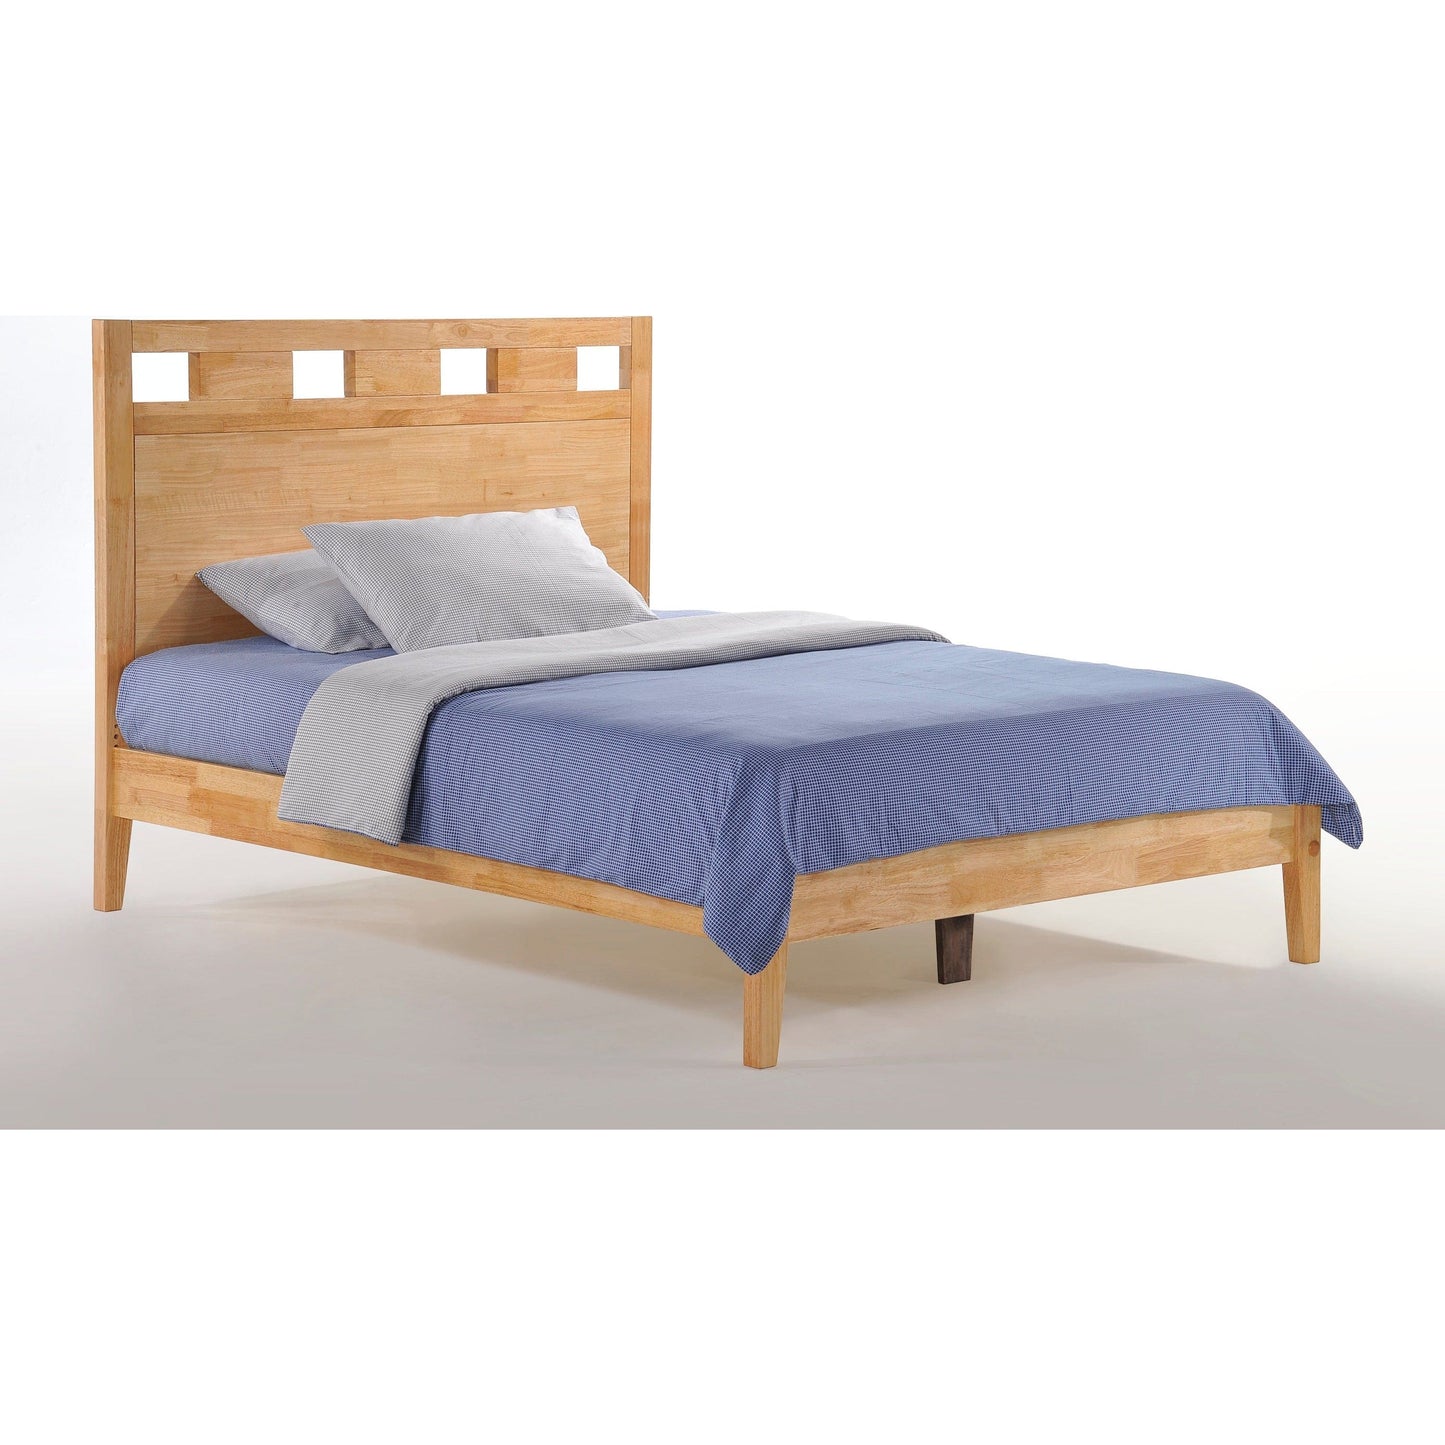 Night And Day Full Tamarind Bed (P Series) in cherry finish Natural TAM-PH-FUL-NA-COM